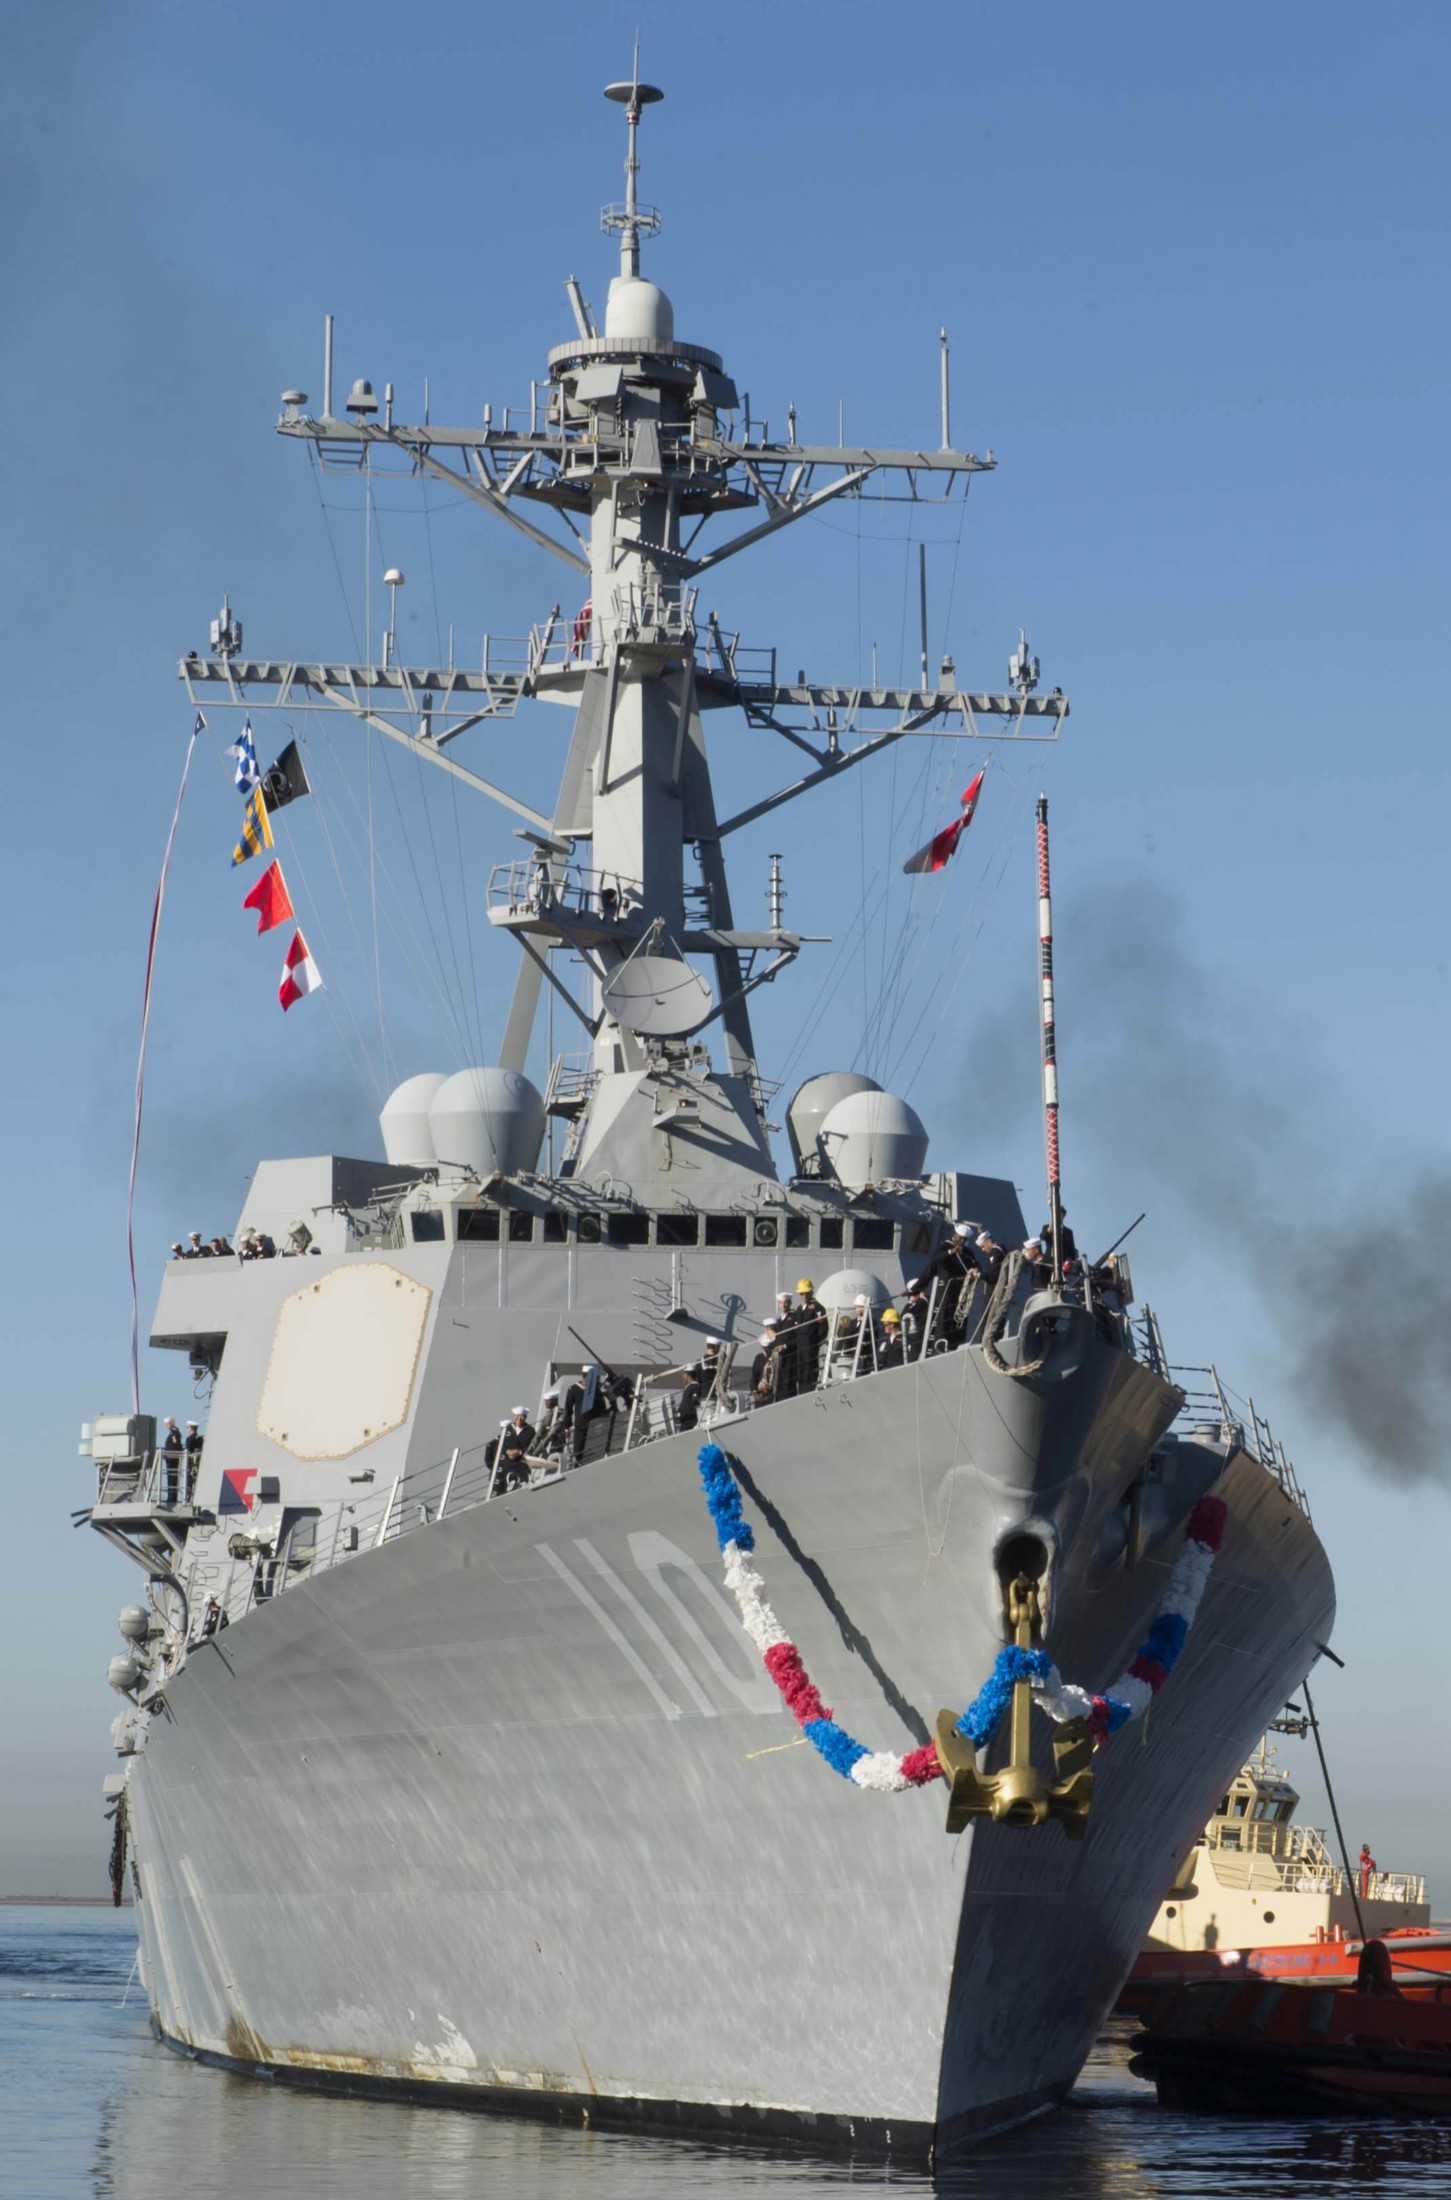 ddg-110 uss william p. lawrence arleigh burke class guided missile destroyer aegis us navy 07